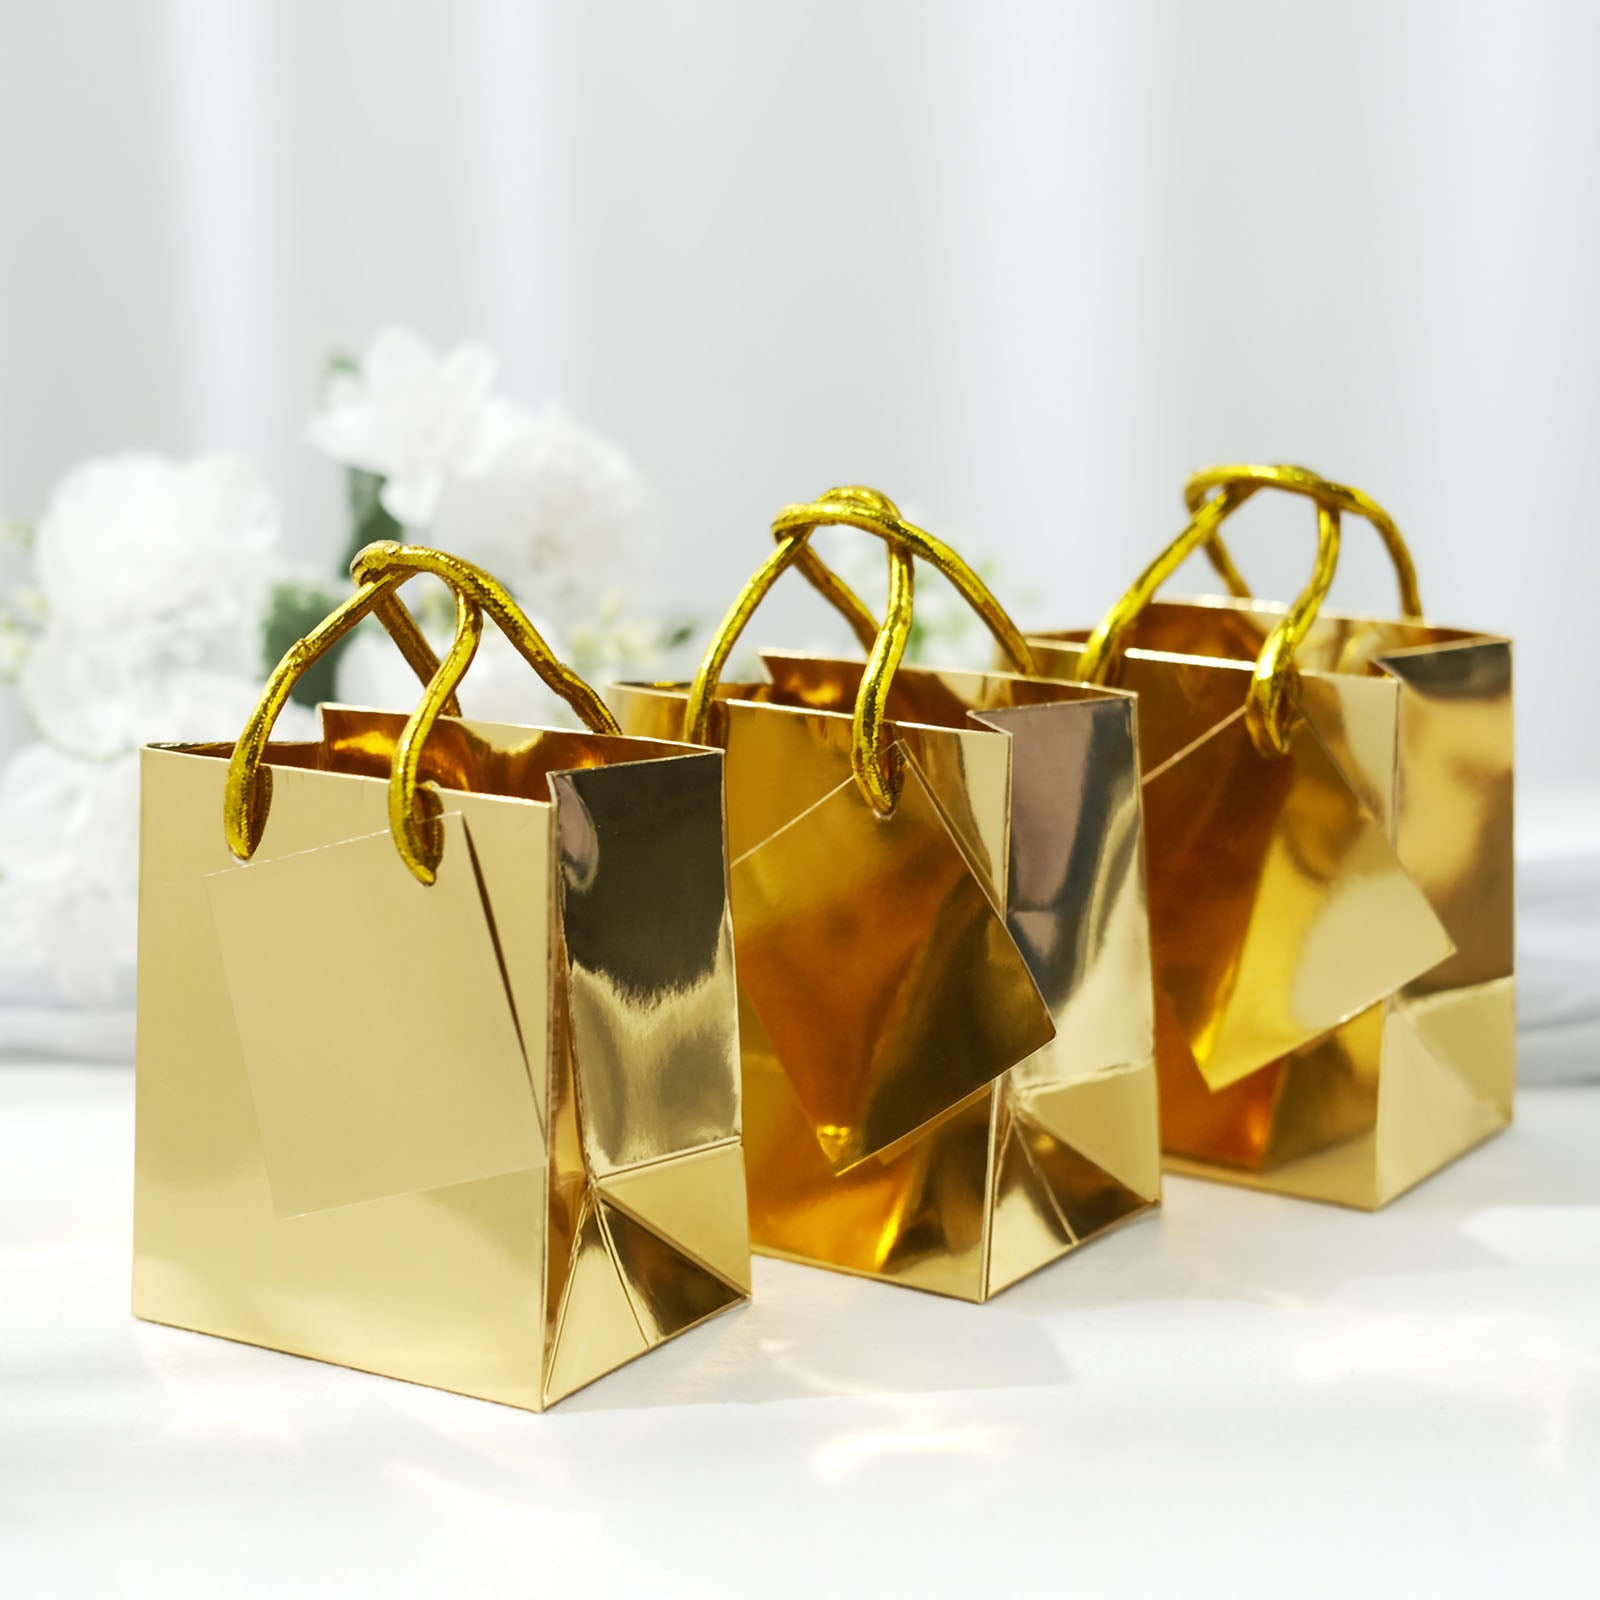 12 Pack 5 Shiny Metallic Gold Foil Paper Bags, Gift Bags With Handles,  Small Party Favor Goodie Bags, Shopping Bags, Wedding Guest Bags 